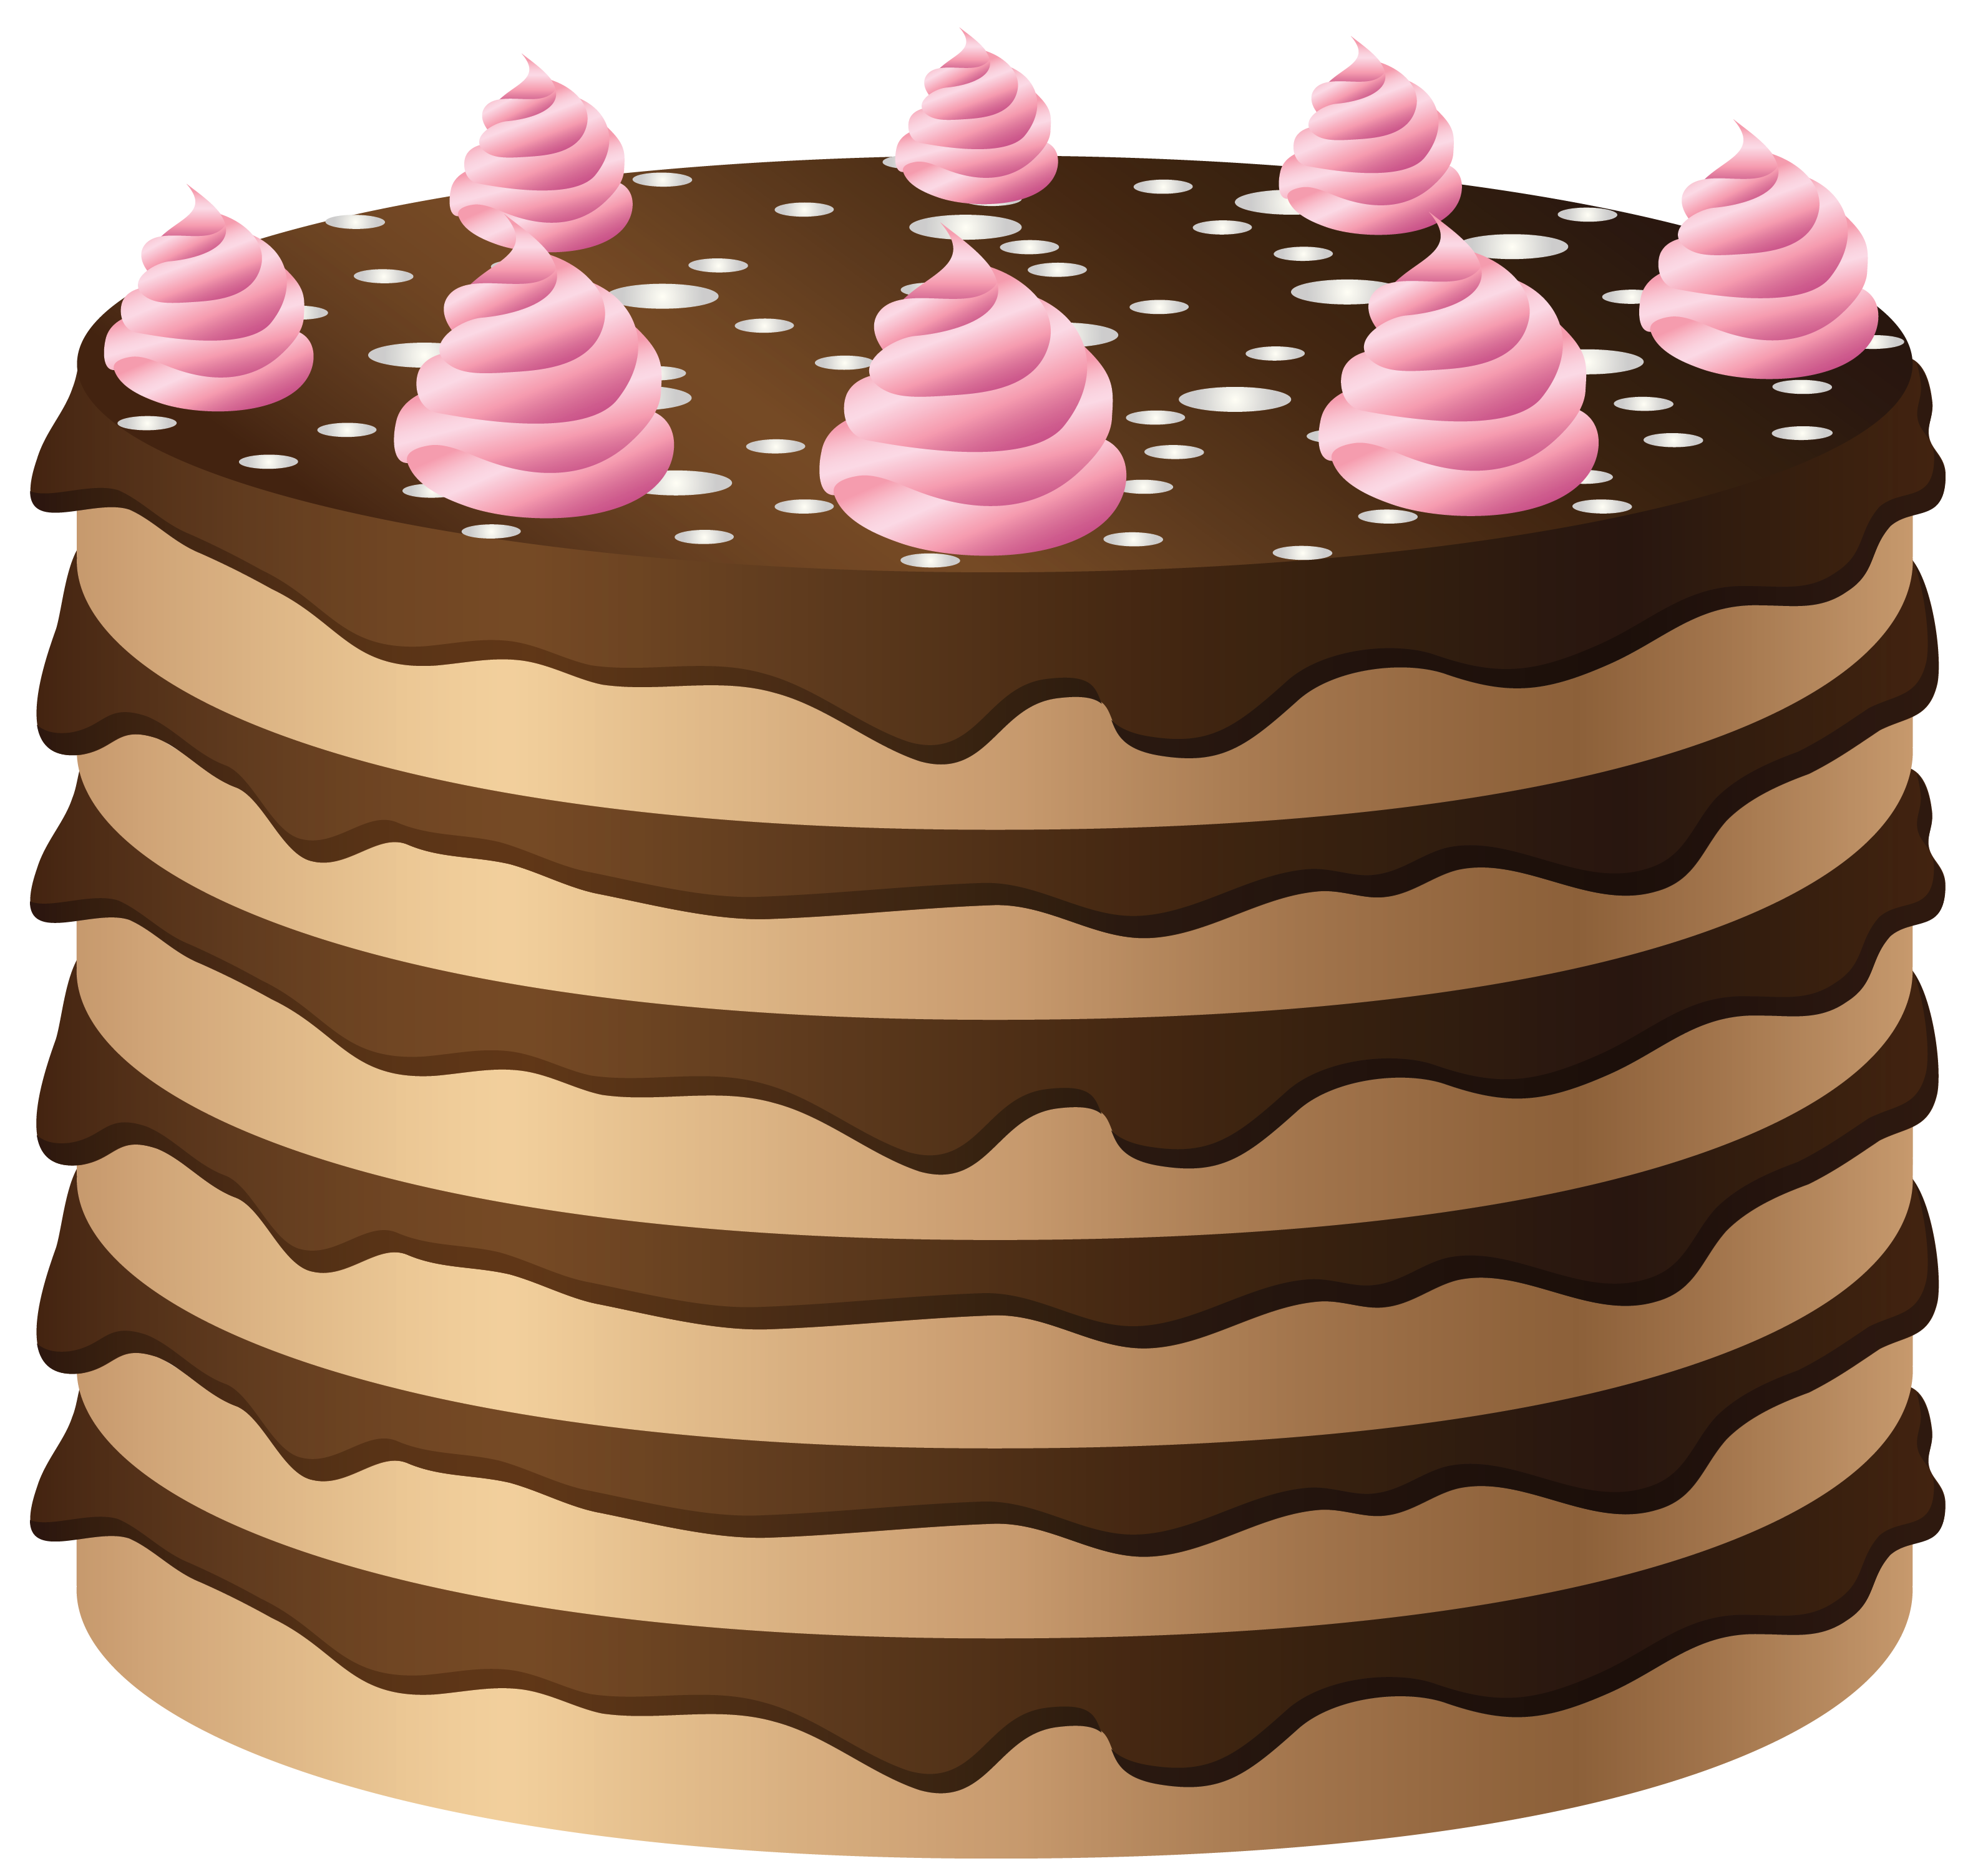 Chocolate Cake with Pink Cream PNG Clipart.